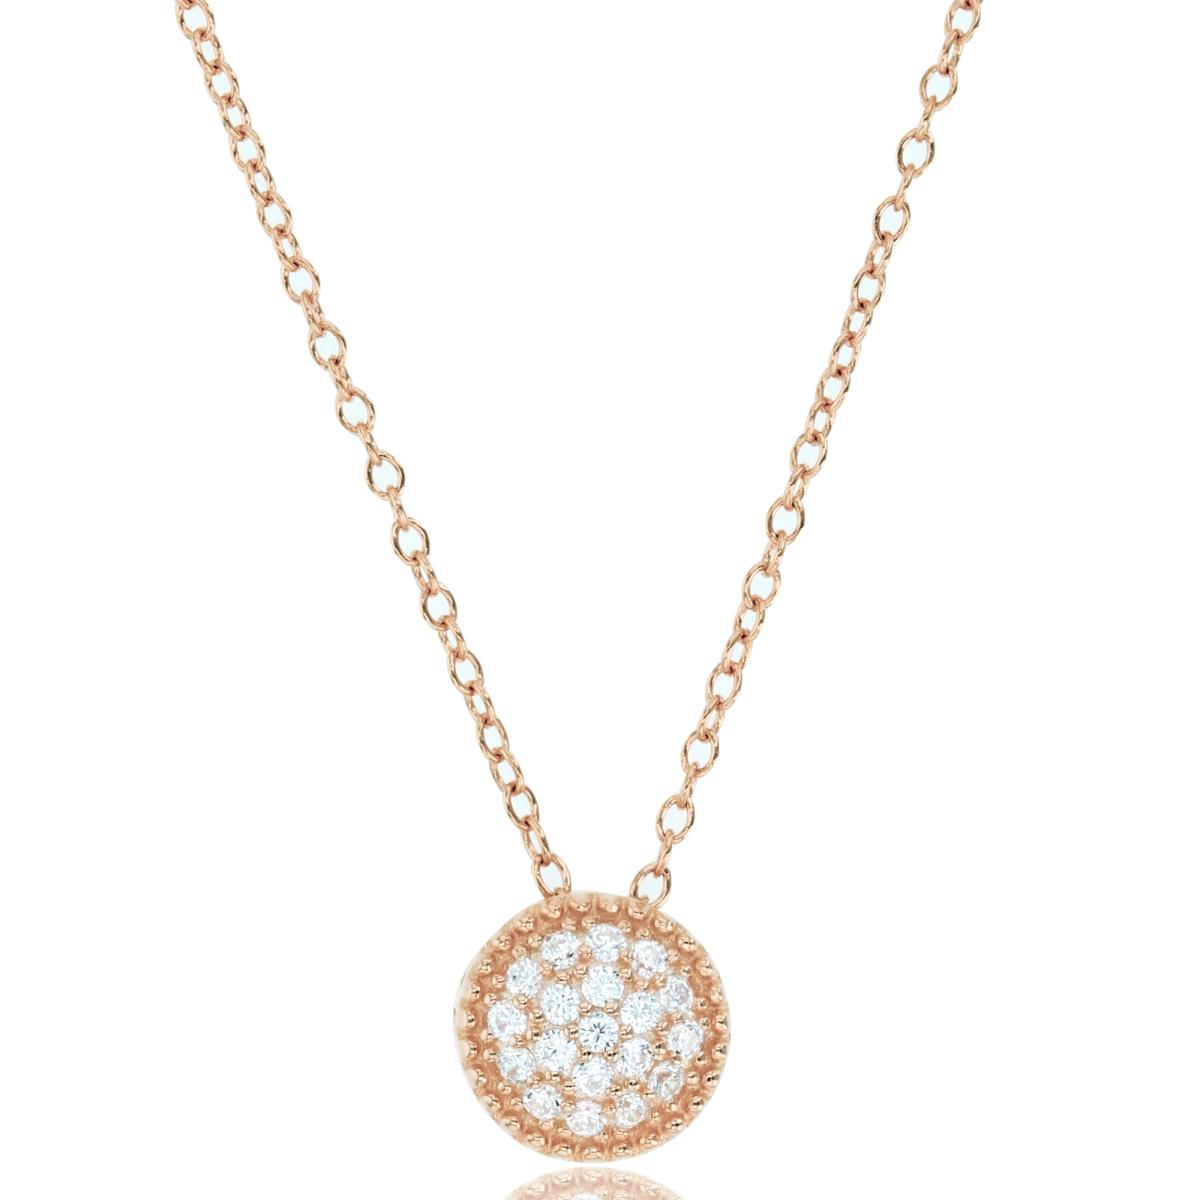 Sterling Silver+1Micron Rose Gold Rnd CZ Pave Milgrain Puffy Circle 18"Necklace